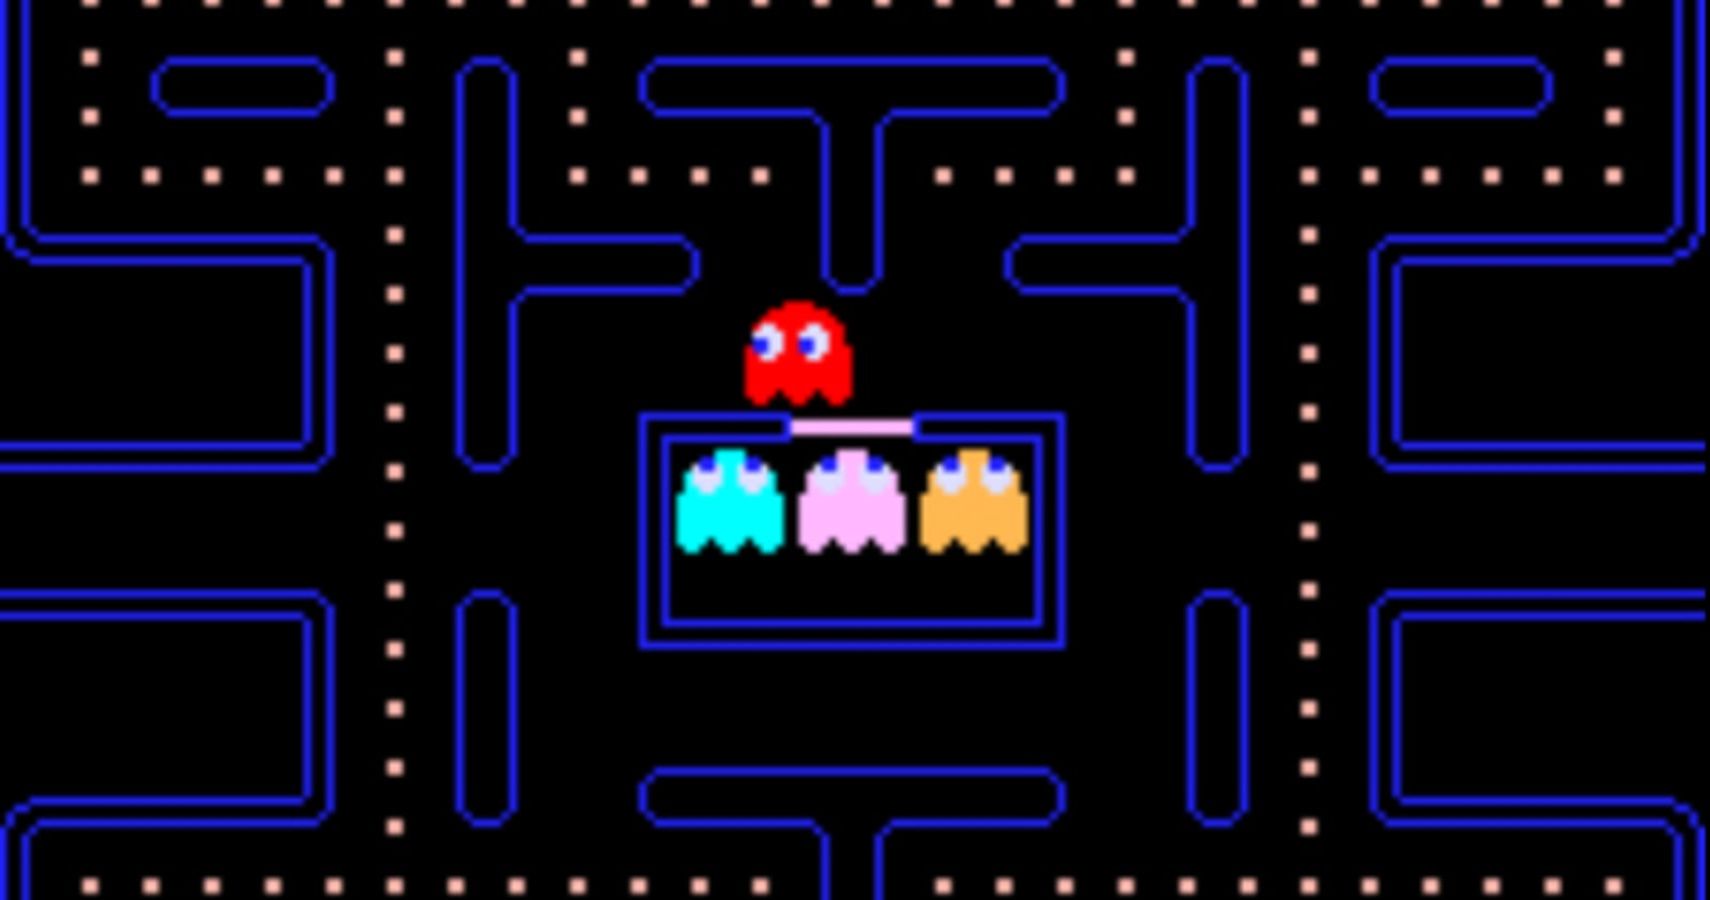 Stay and Play at Home with Popular Past Doodles: PAC-MAN google doodle game.